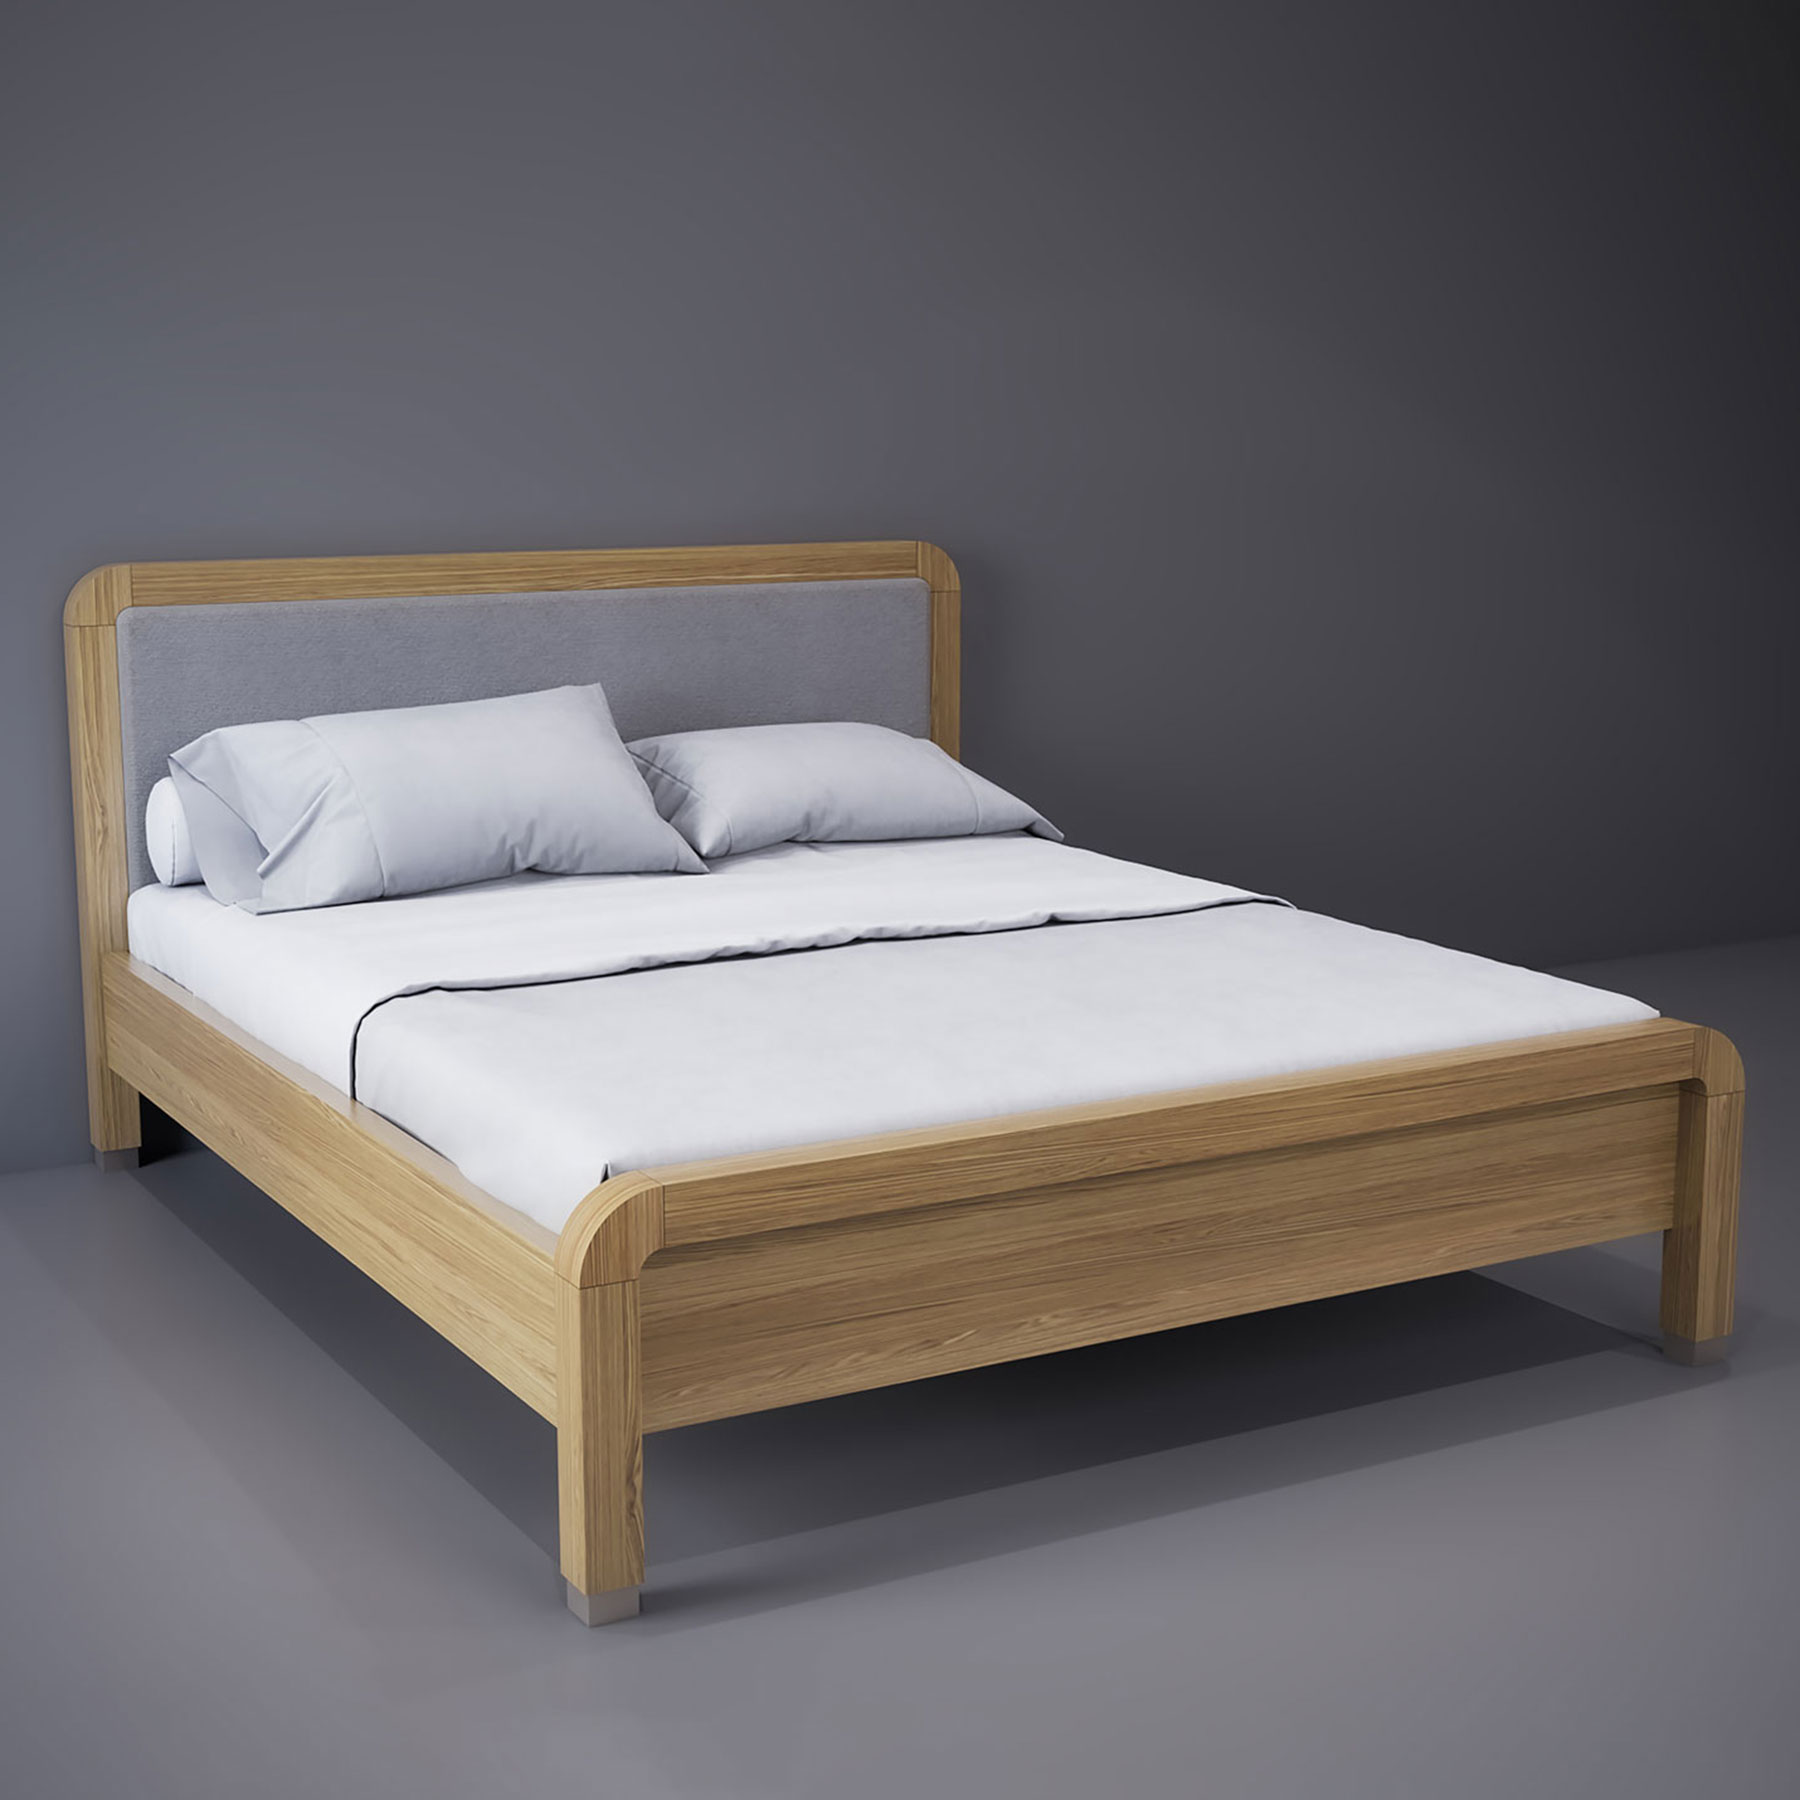 Double bed from the Warsaw collection